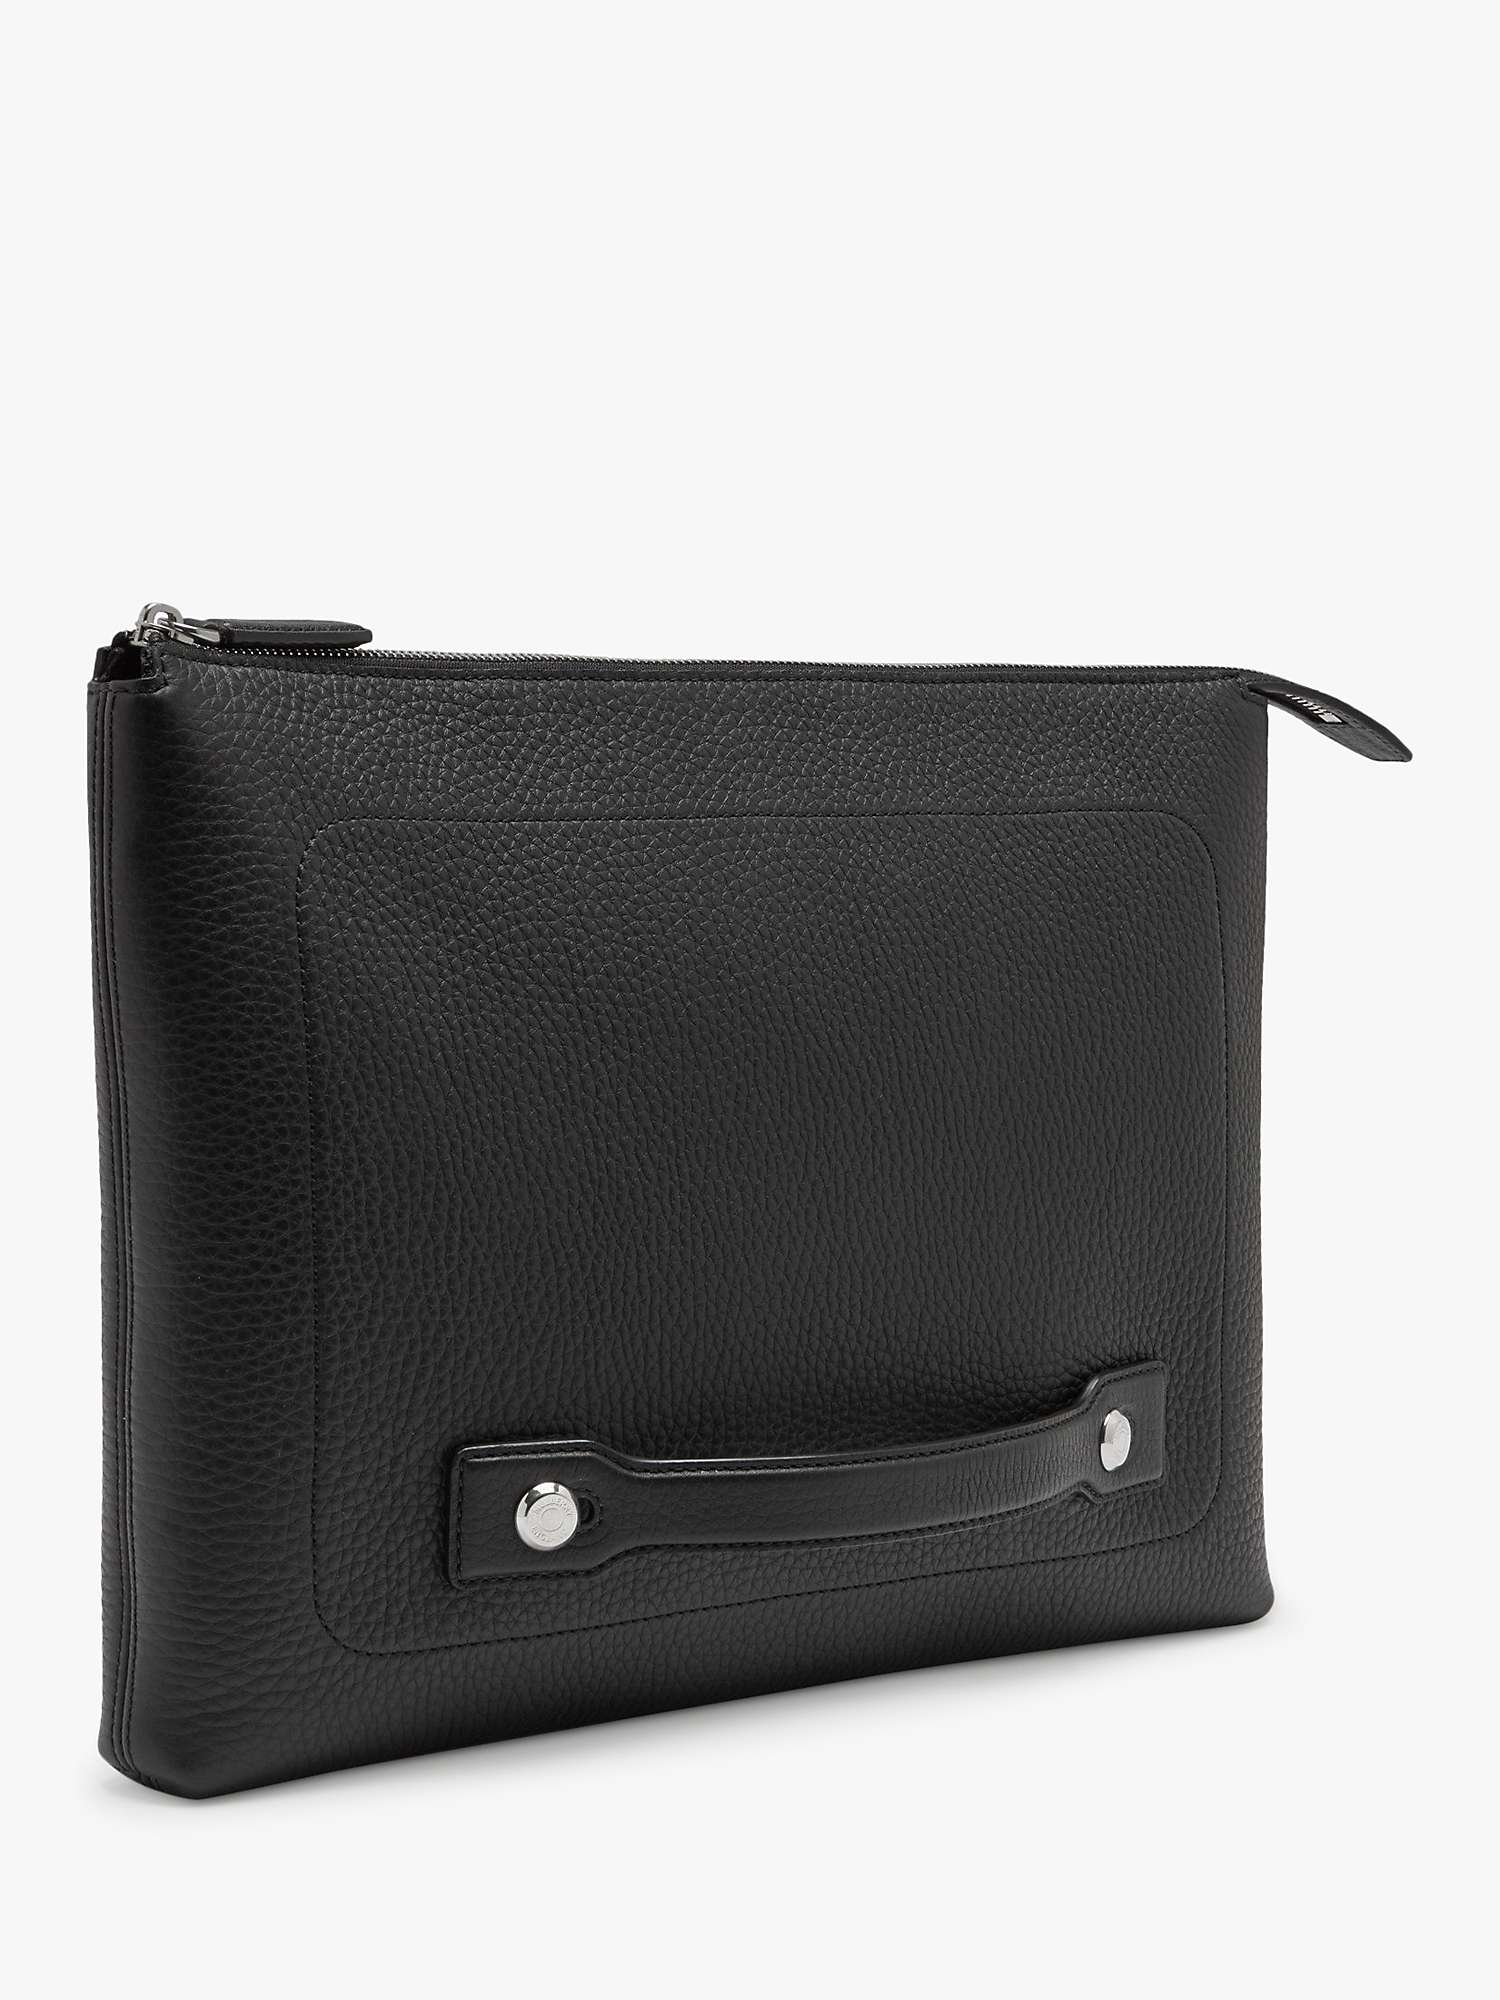 Buy Mulberry City Heavy Grain Leather Laptop Case Online at johnlewis.com